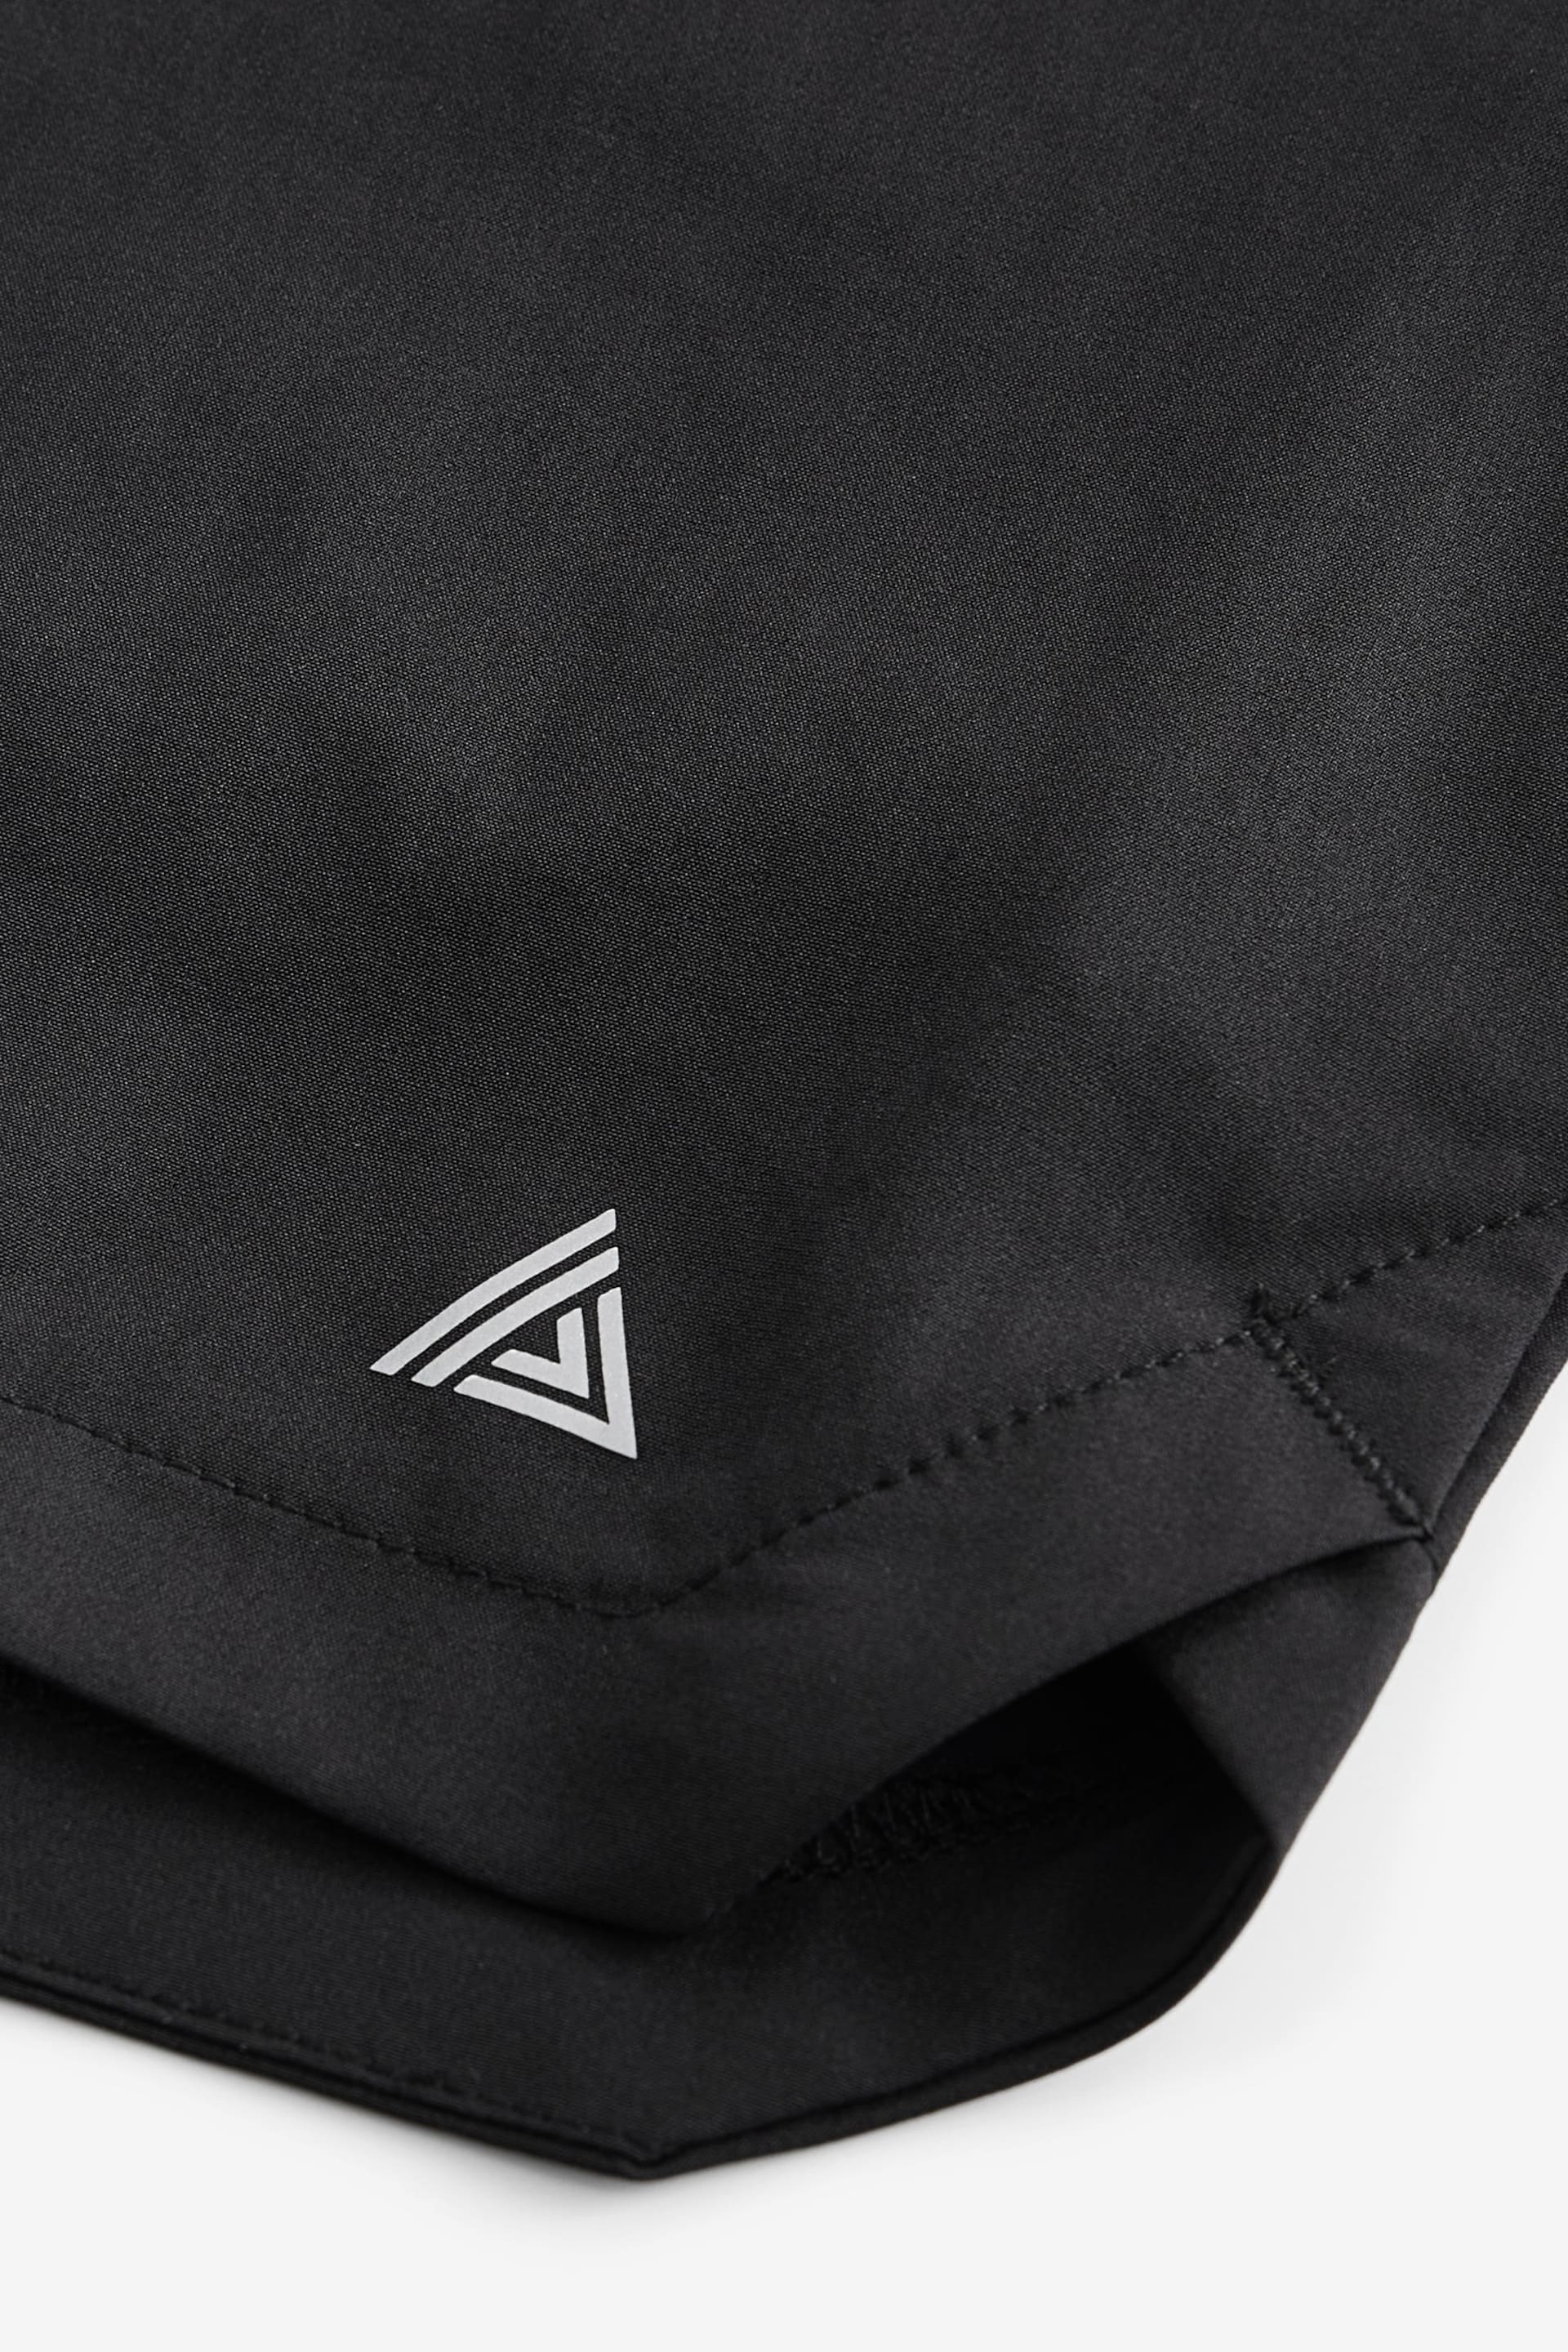 Black Training Shorts With Liner - Image 11 of 11